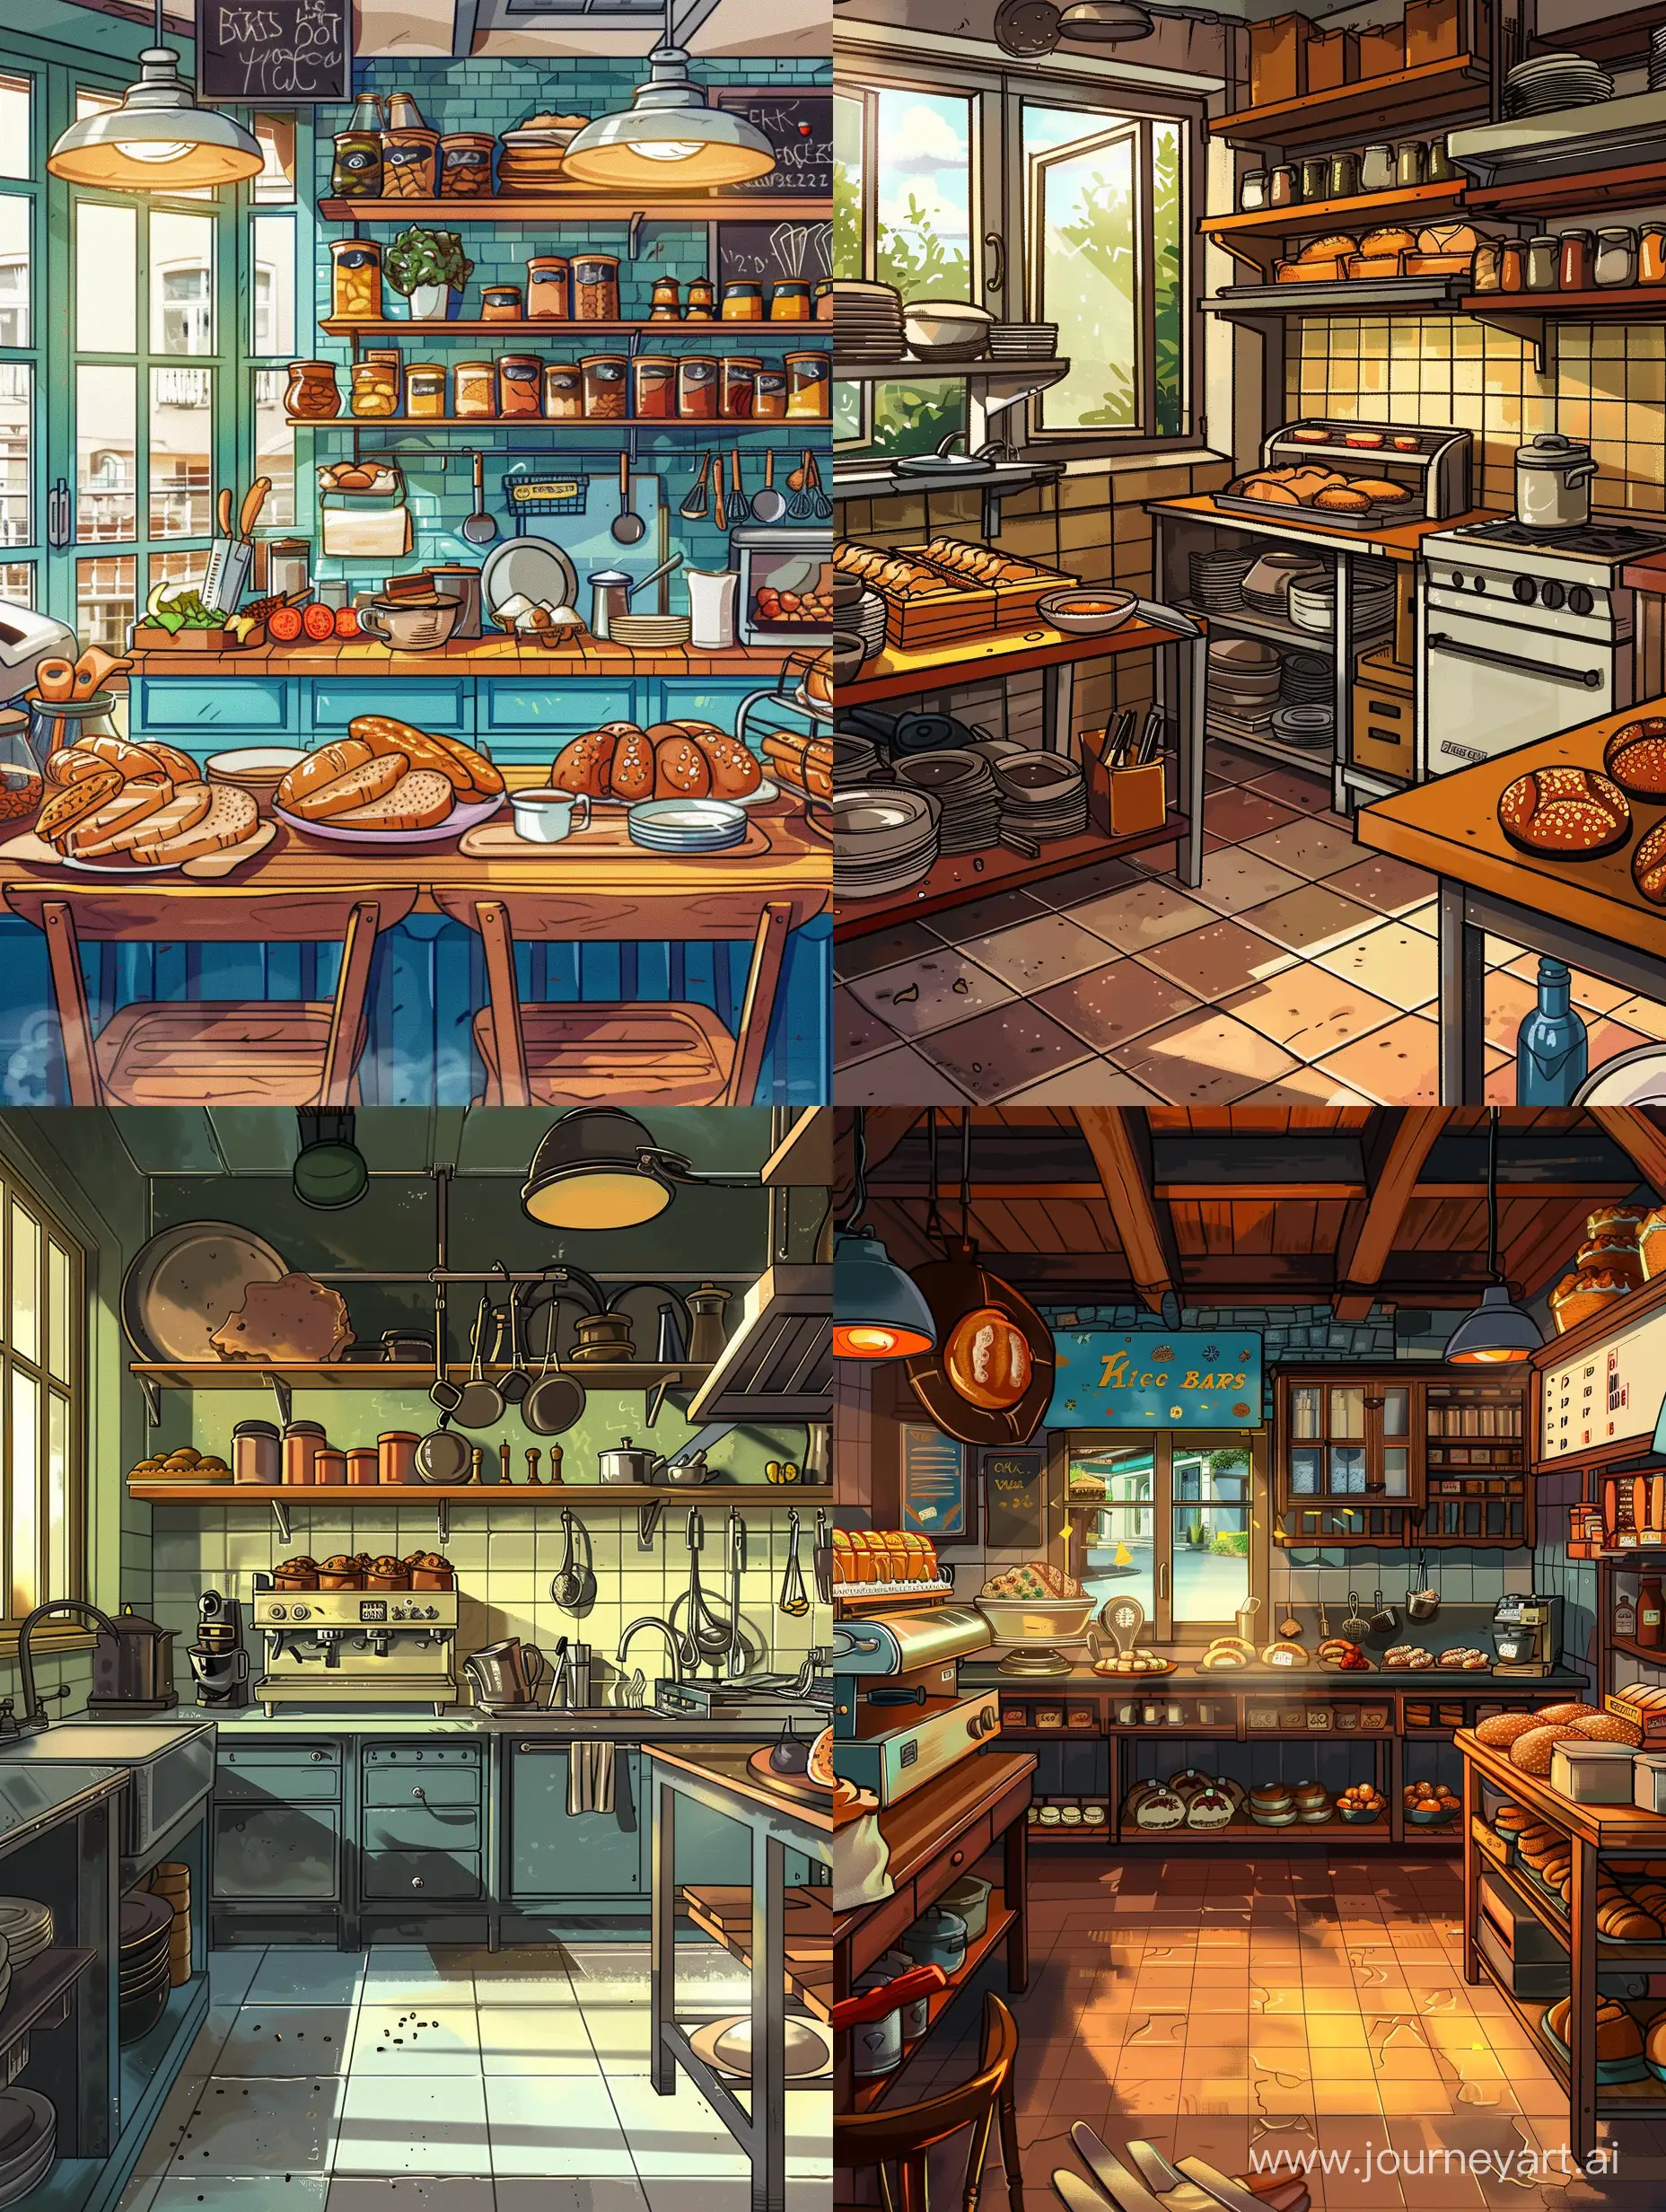 Comic cartoon of a bakery interior kitchen with ustensils for a video gane background, fun. Use only 3c2337,fadcca,f5965f,ed6f4c,fa4637 and their shades, Style of Erik Jones, sparth, highly detailed, hyper-detailed